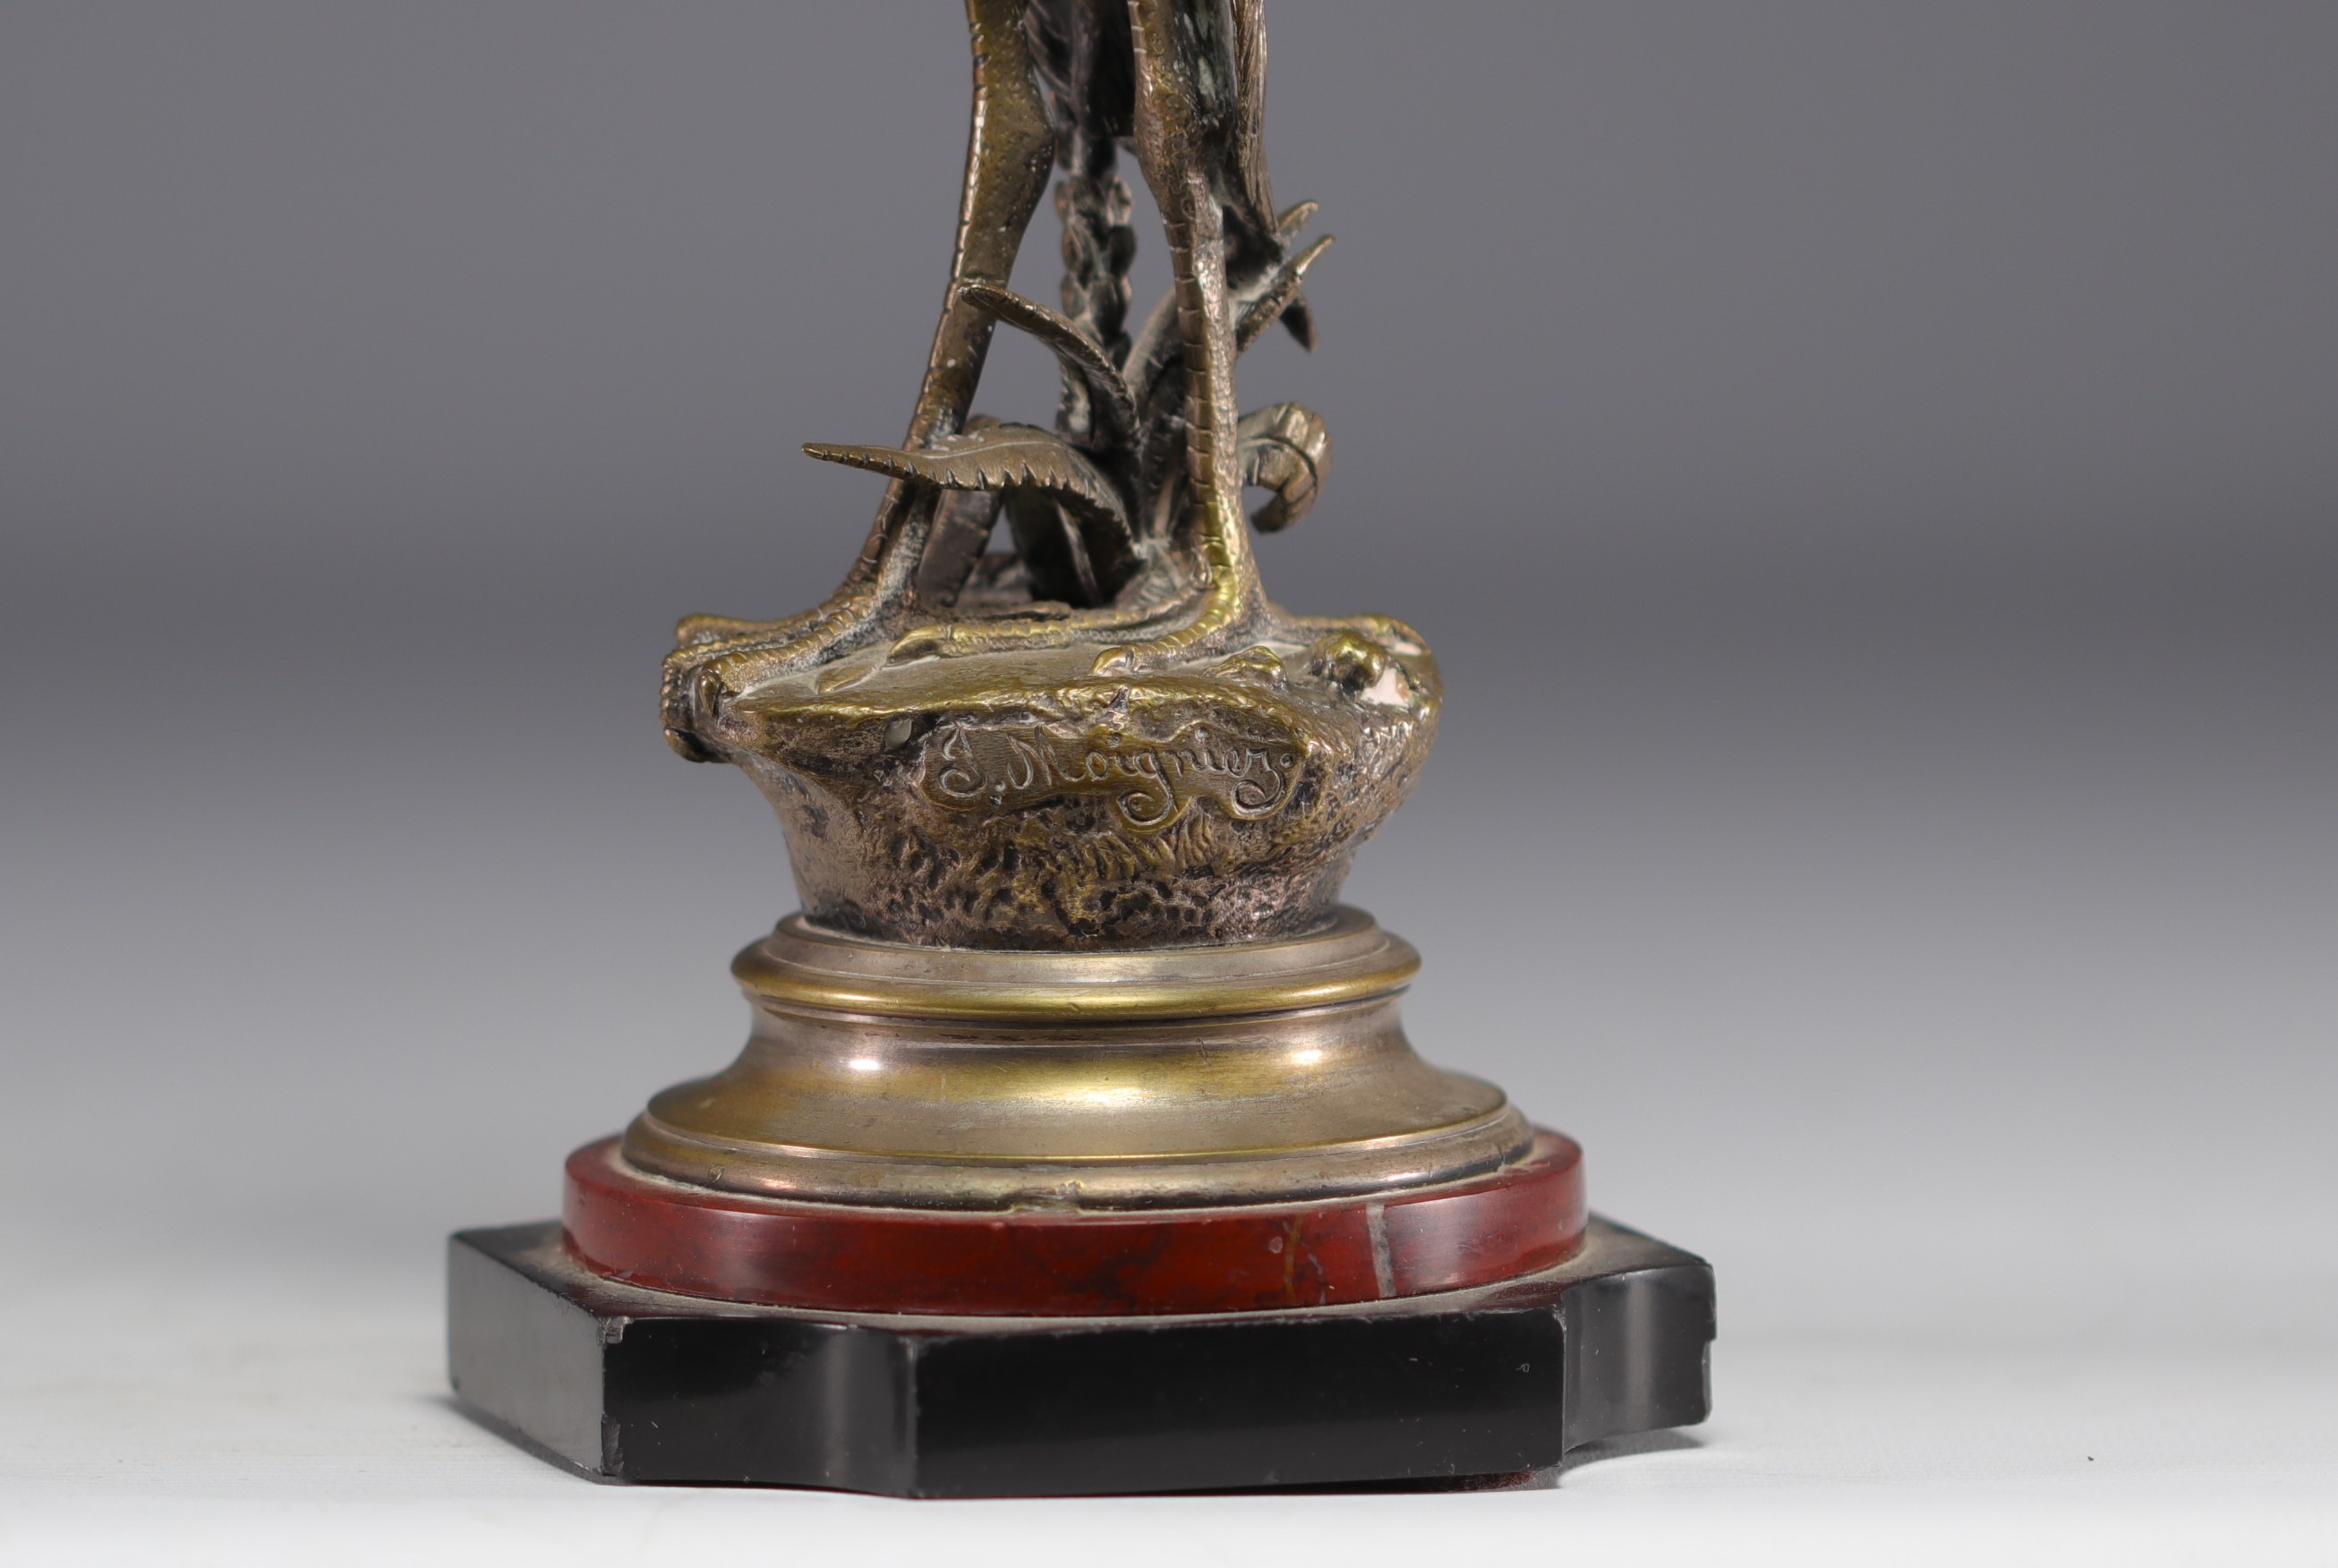 Jules MOIGNIEZ (1835-1894) "Les echassiers" Pair of bronze candlesticks. - Image 5 of 5